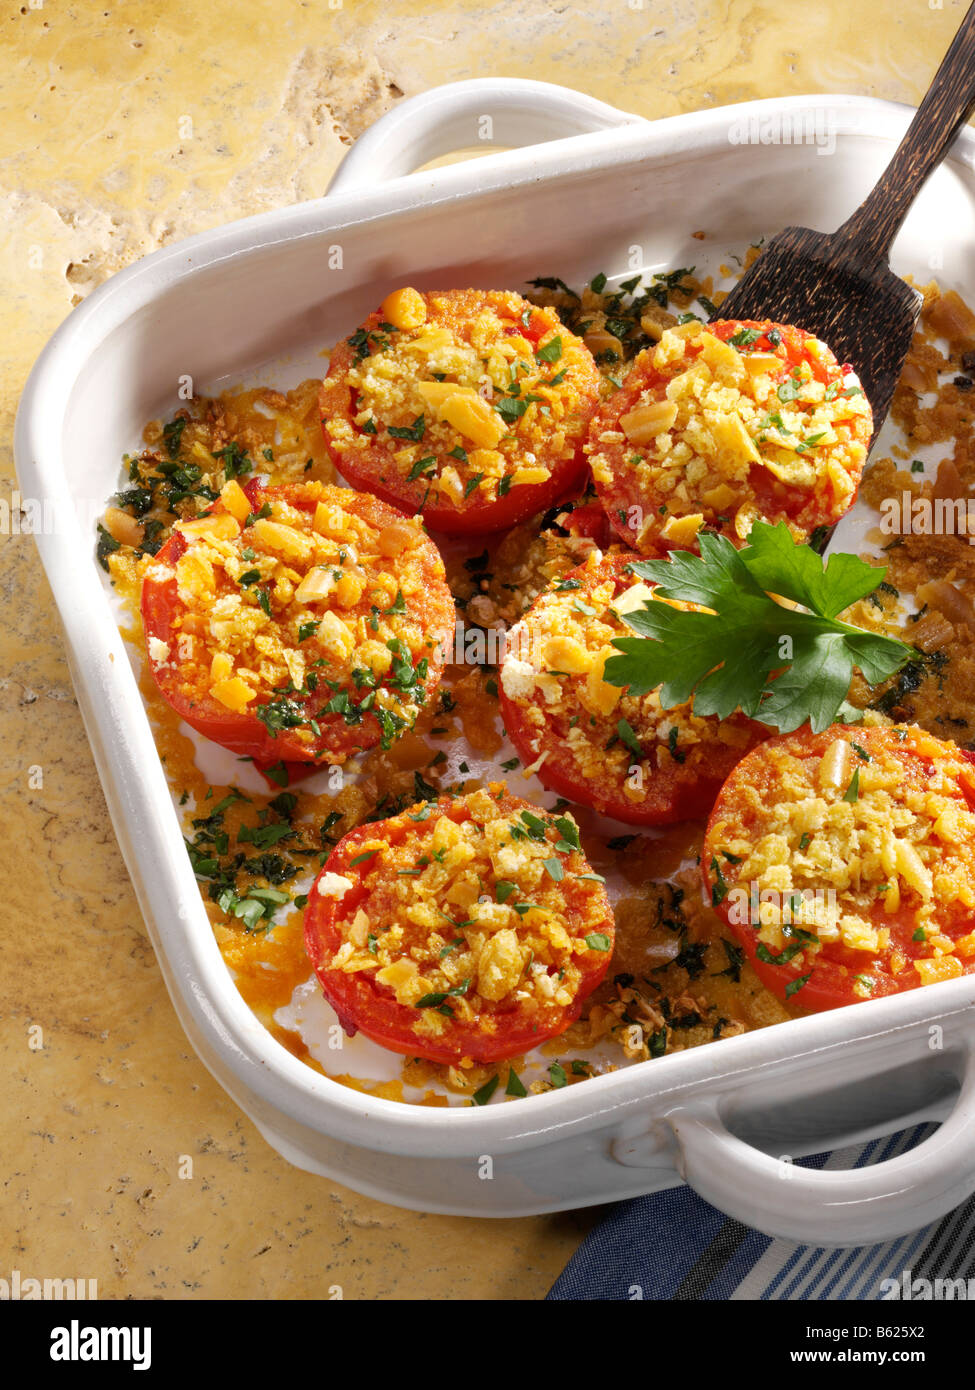 Oven-cooked tomatoes in a casserole dish Stock Photo